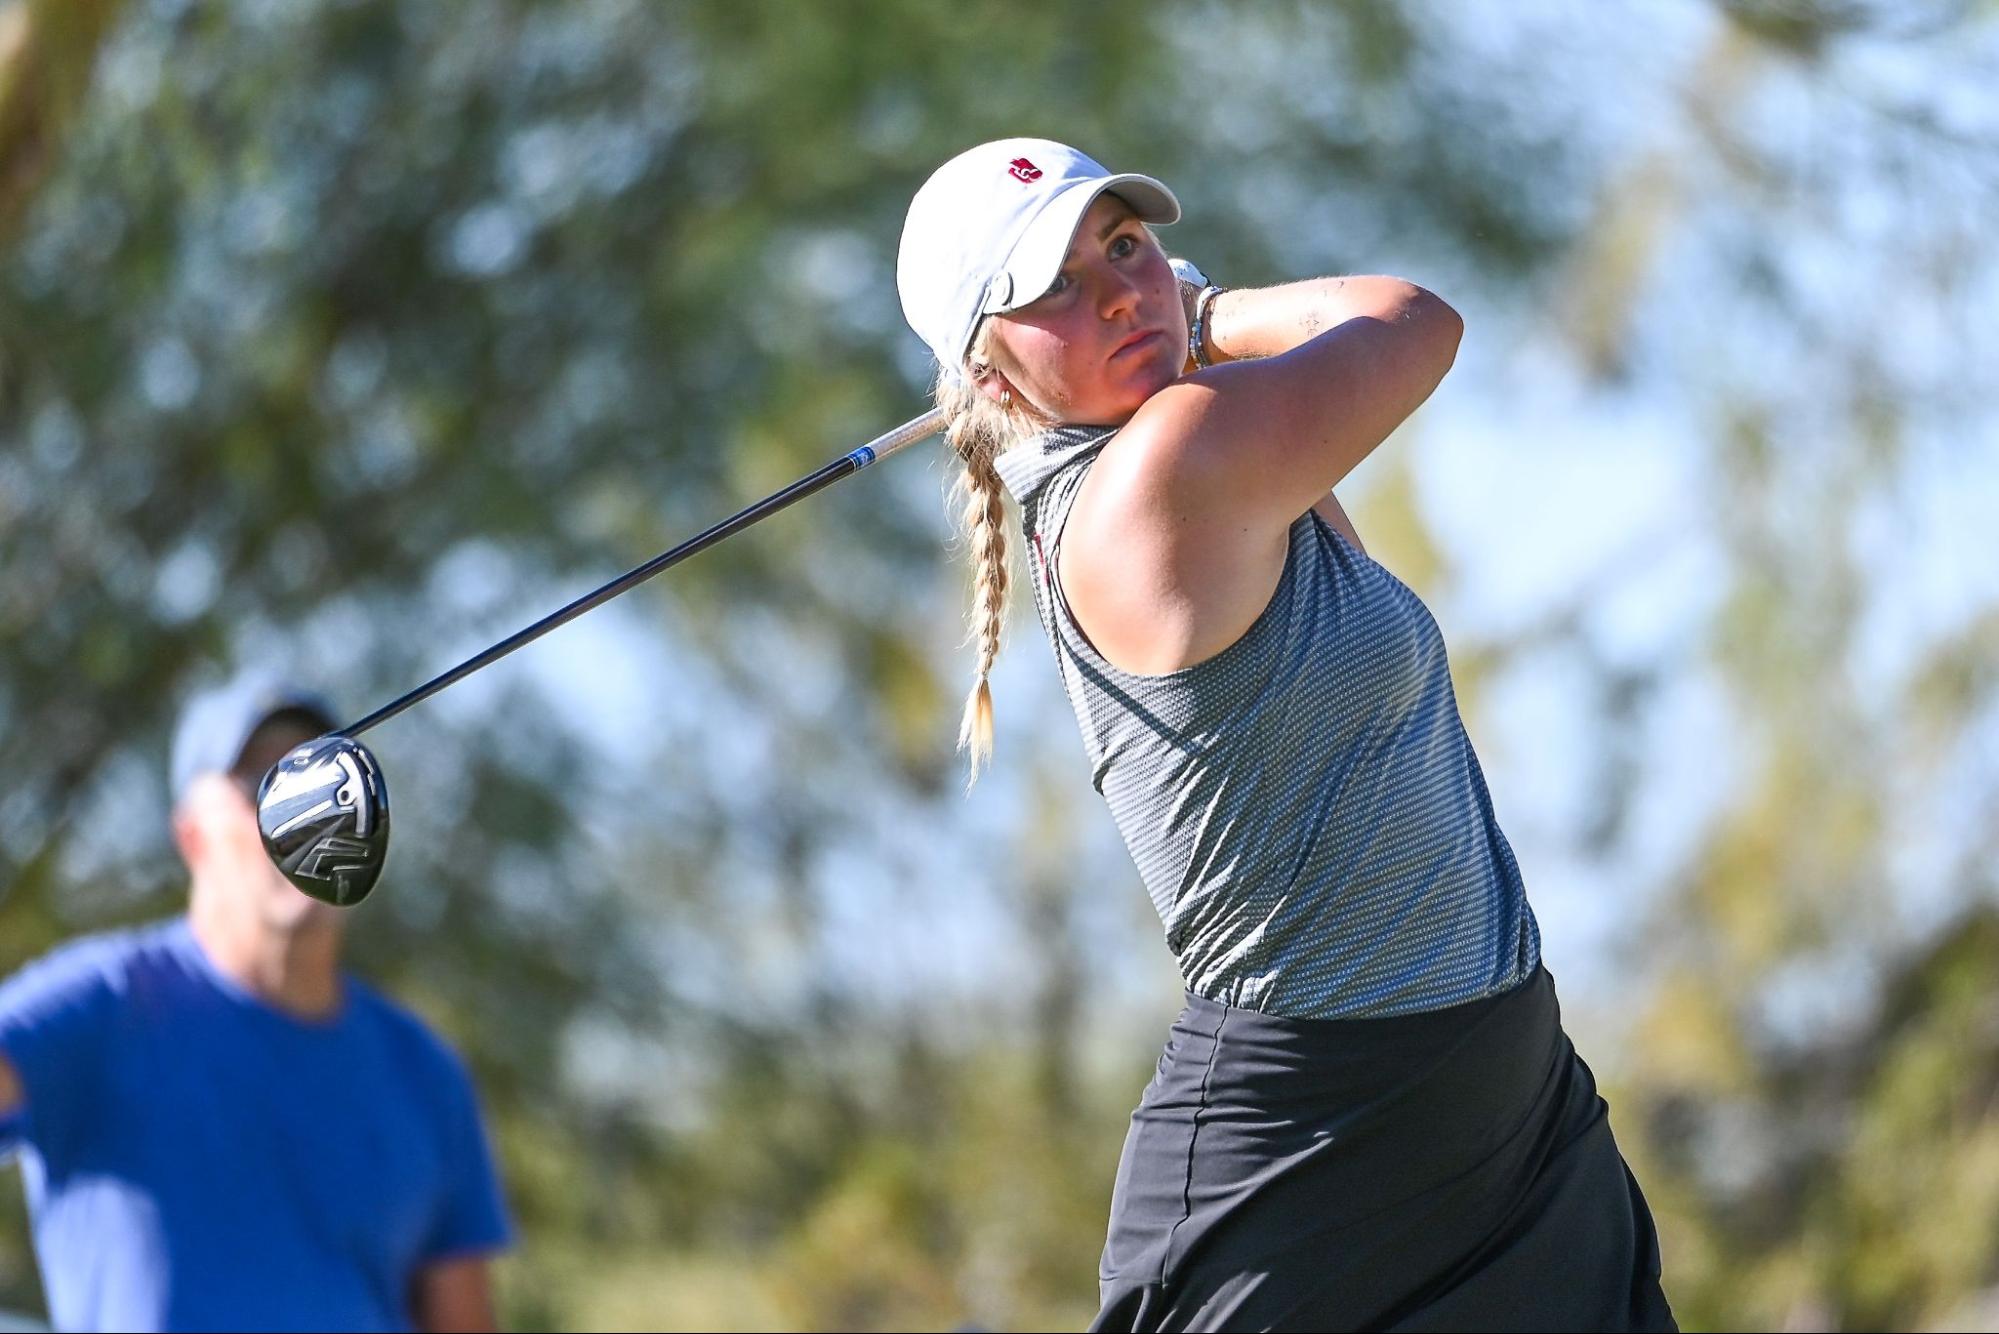 Sophomore Karen Fredgaard capped off her historic season for the UH women's golf team with a 28th place finish at the 2021 NCAA Championships. | Courtesy of UH athletics